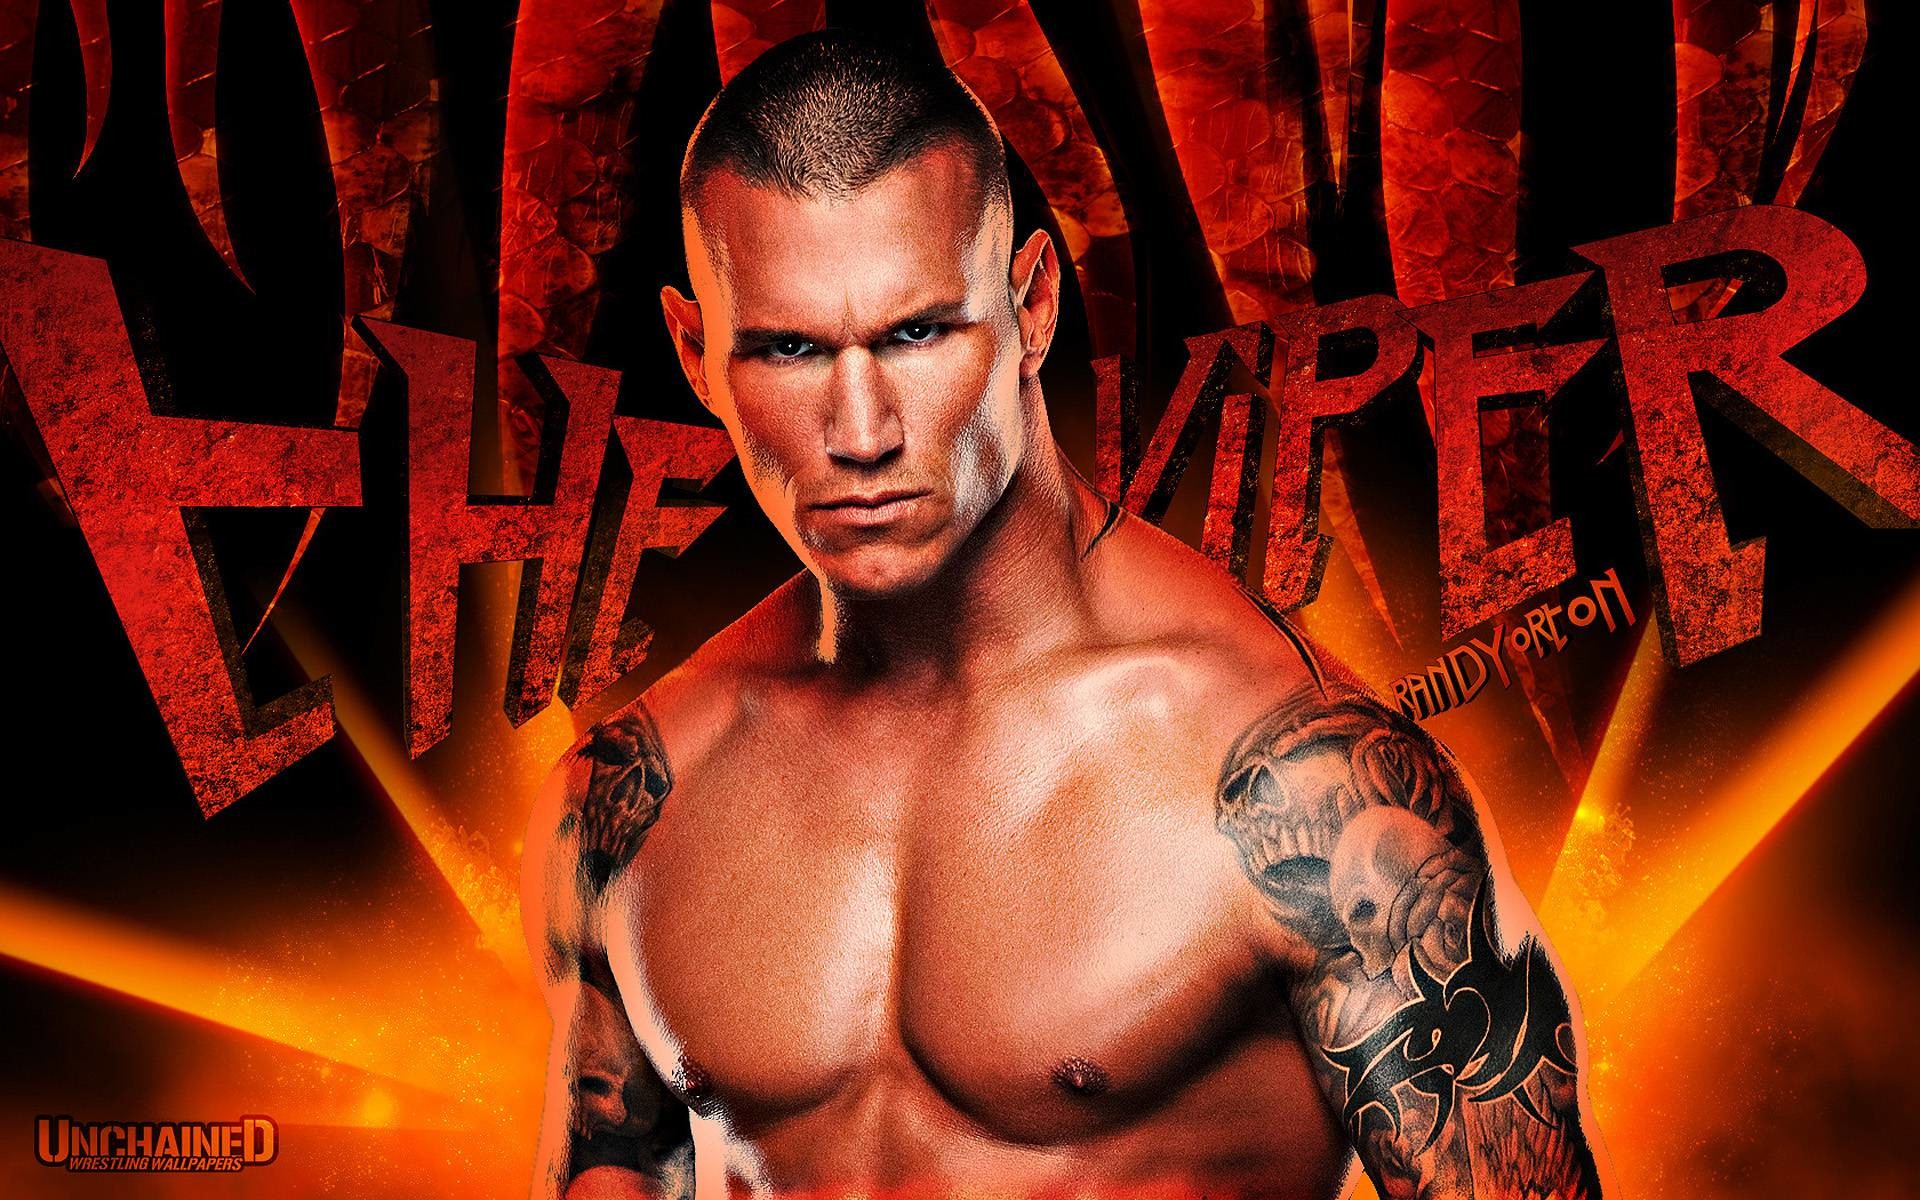 1920x1200 Most Downloaded Randy Orton Wallpapers - Full HD wallpaper search